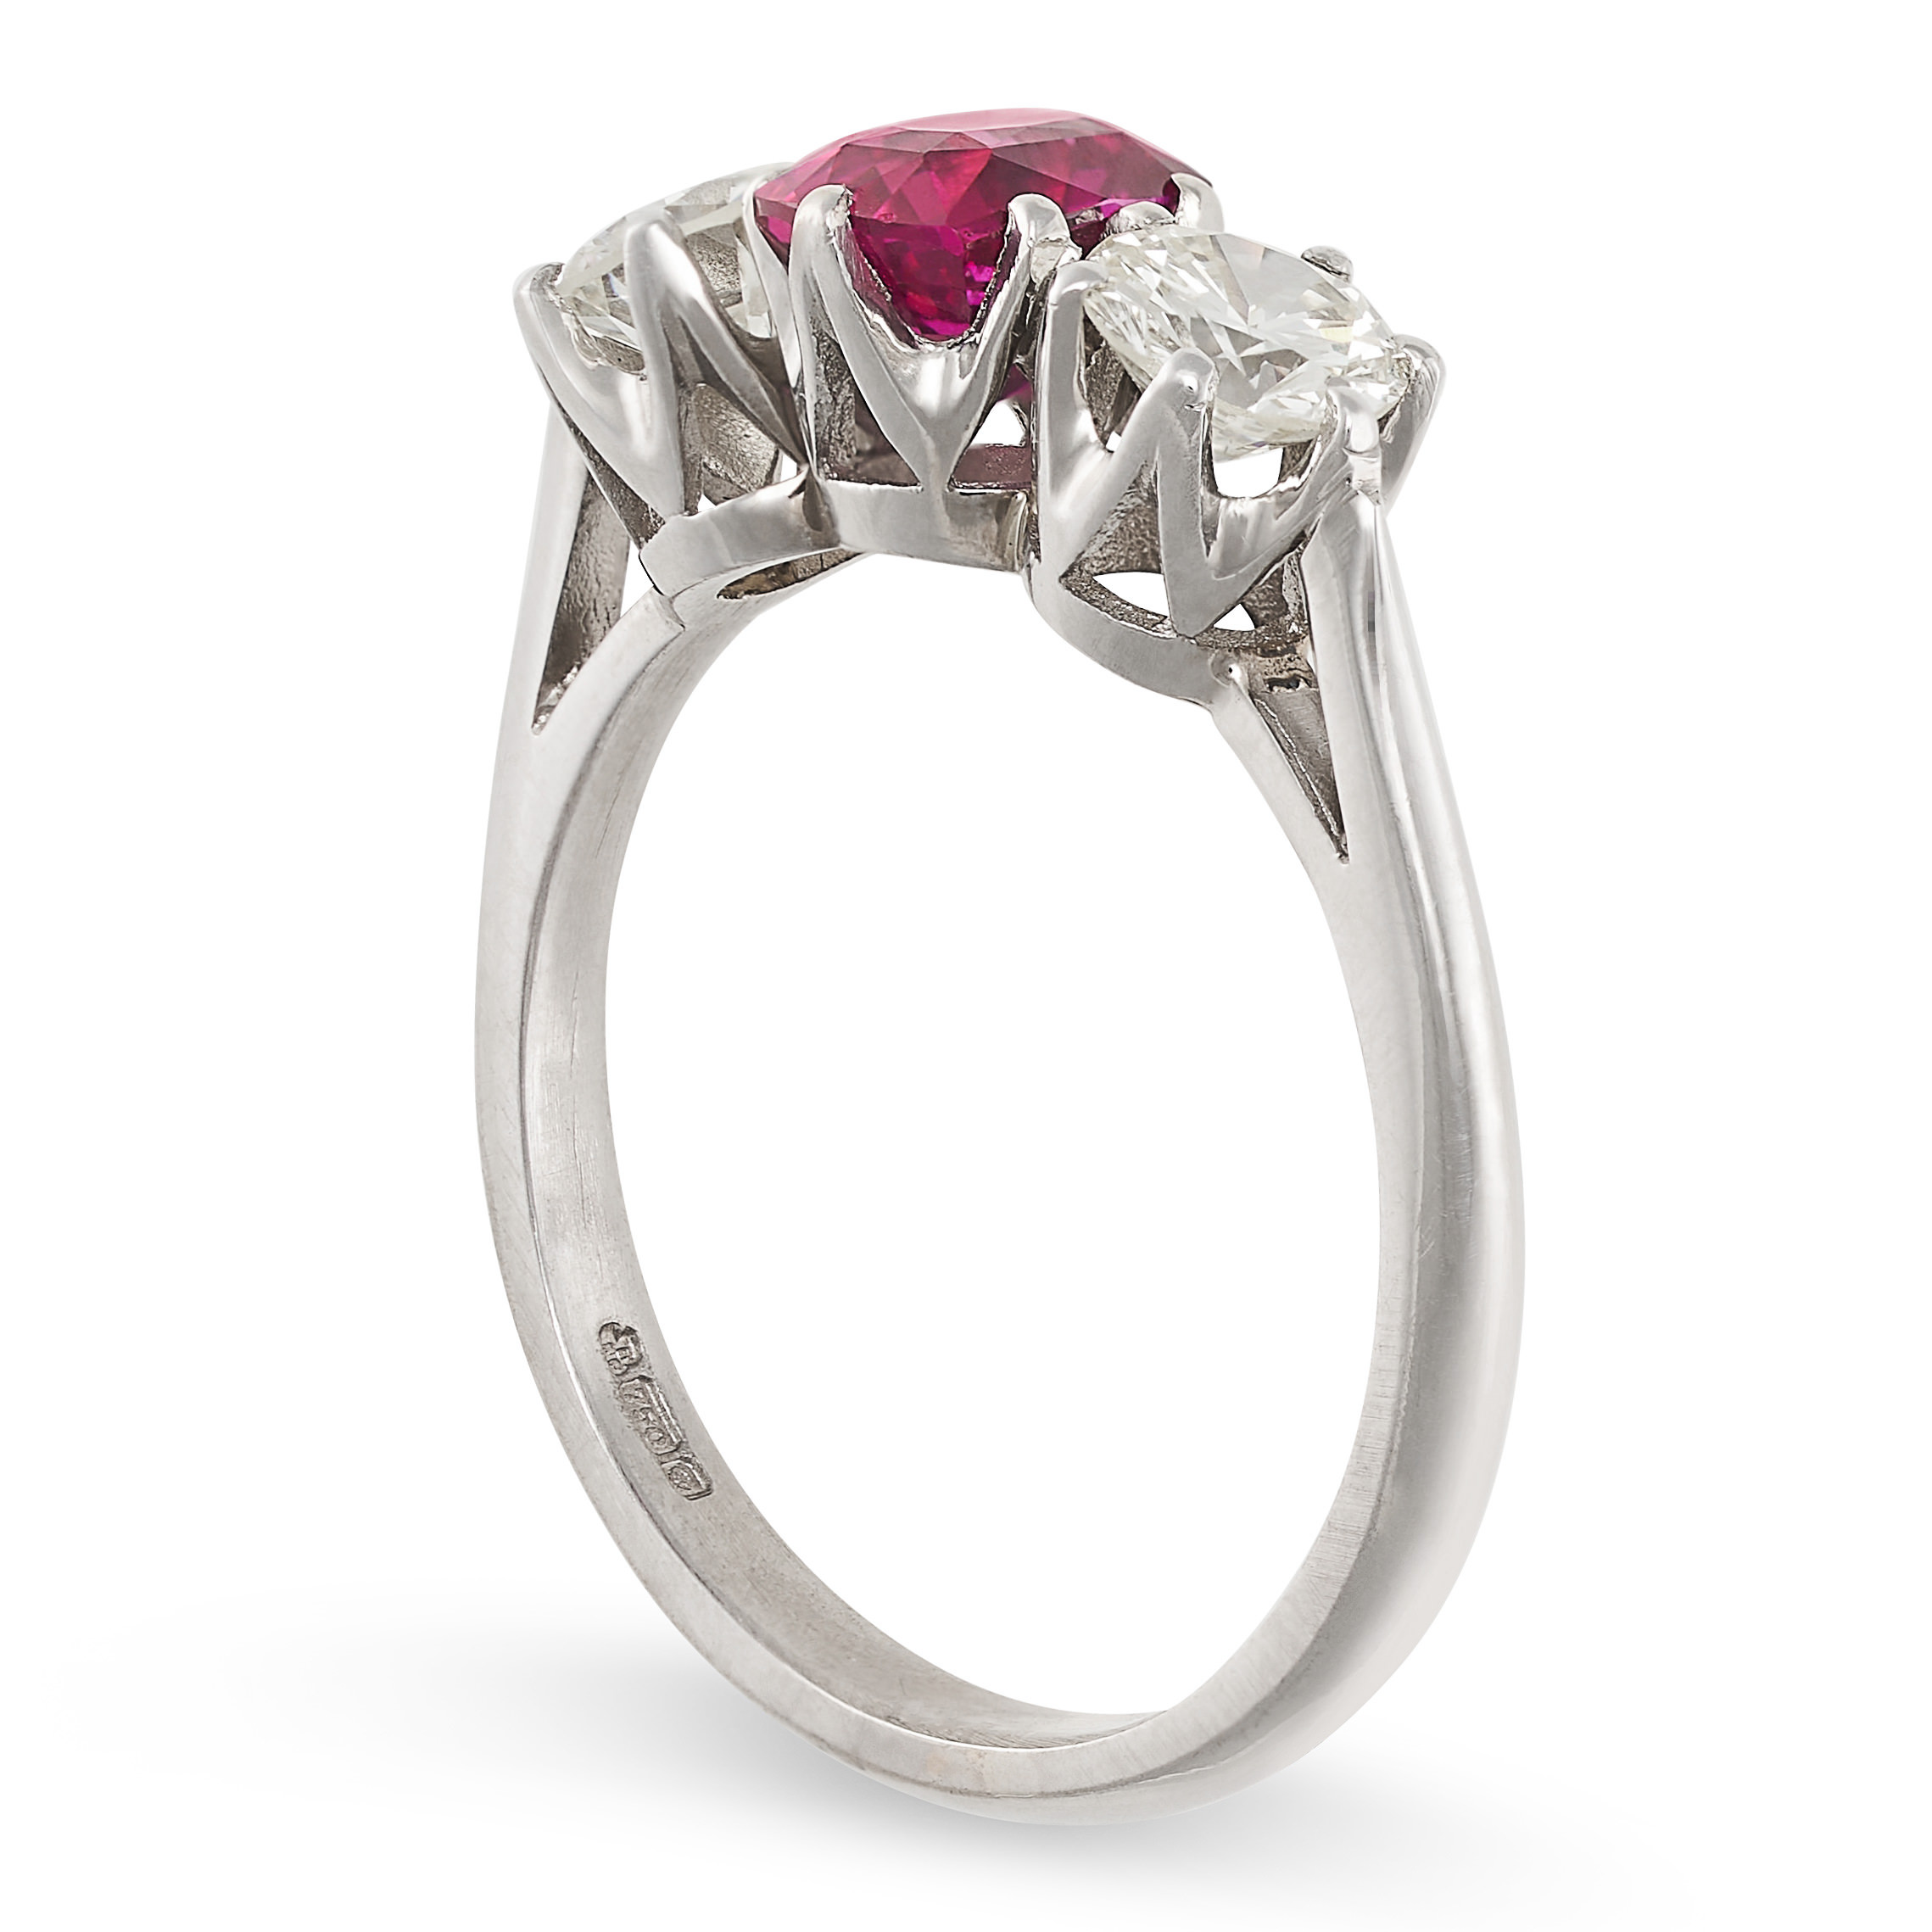 A FINE UNHEATED RUBY AND DIAMOND THREE STONE RING in 18ct white gold, set with a cushion cut ruby of - Image 2 of 2